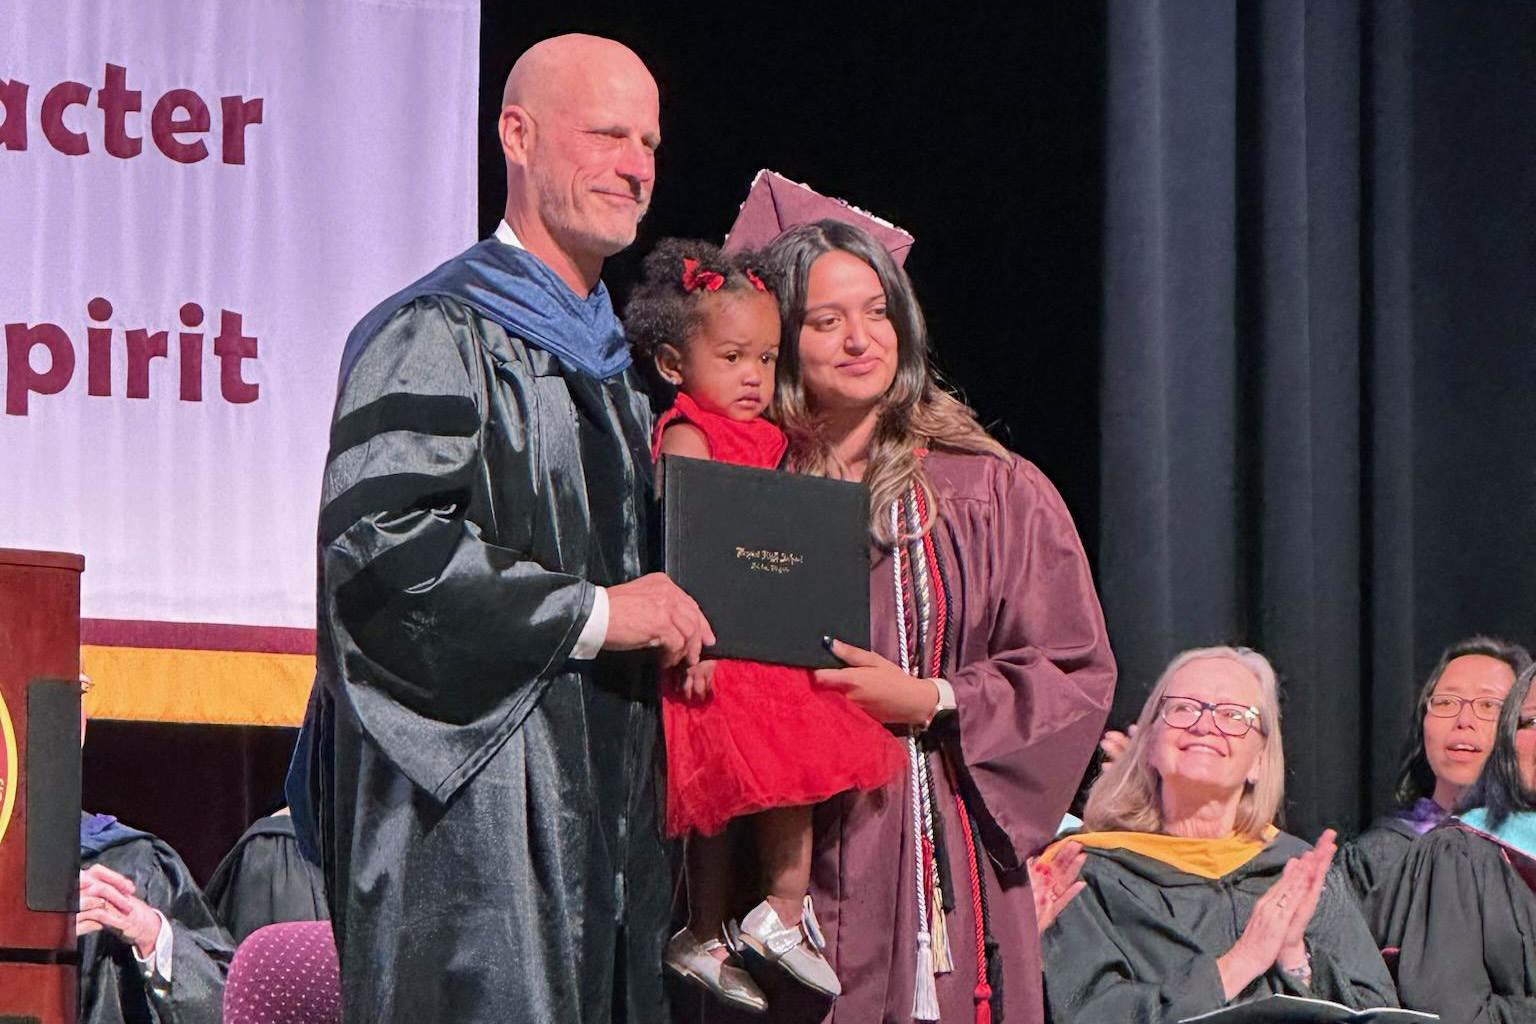 Newly-minted Bryant High School graduate Anyeli Salguero receives her diploma from principal Chris Larrick with her 20-month-old daughter in her arms. School board member Karen Corbett Sanders claps after listening to Anyeli's speech.